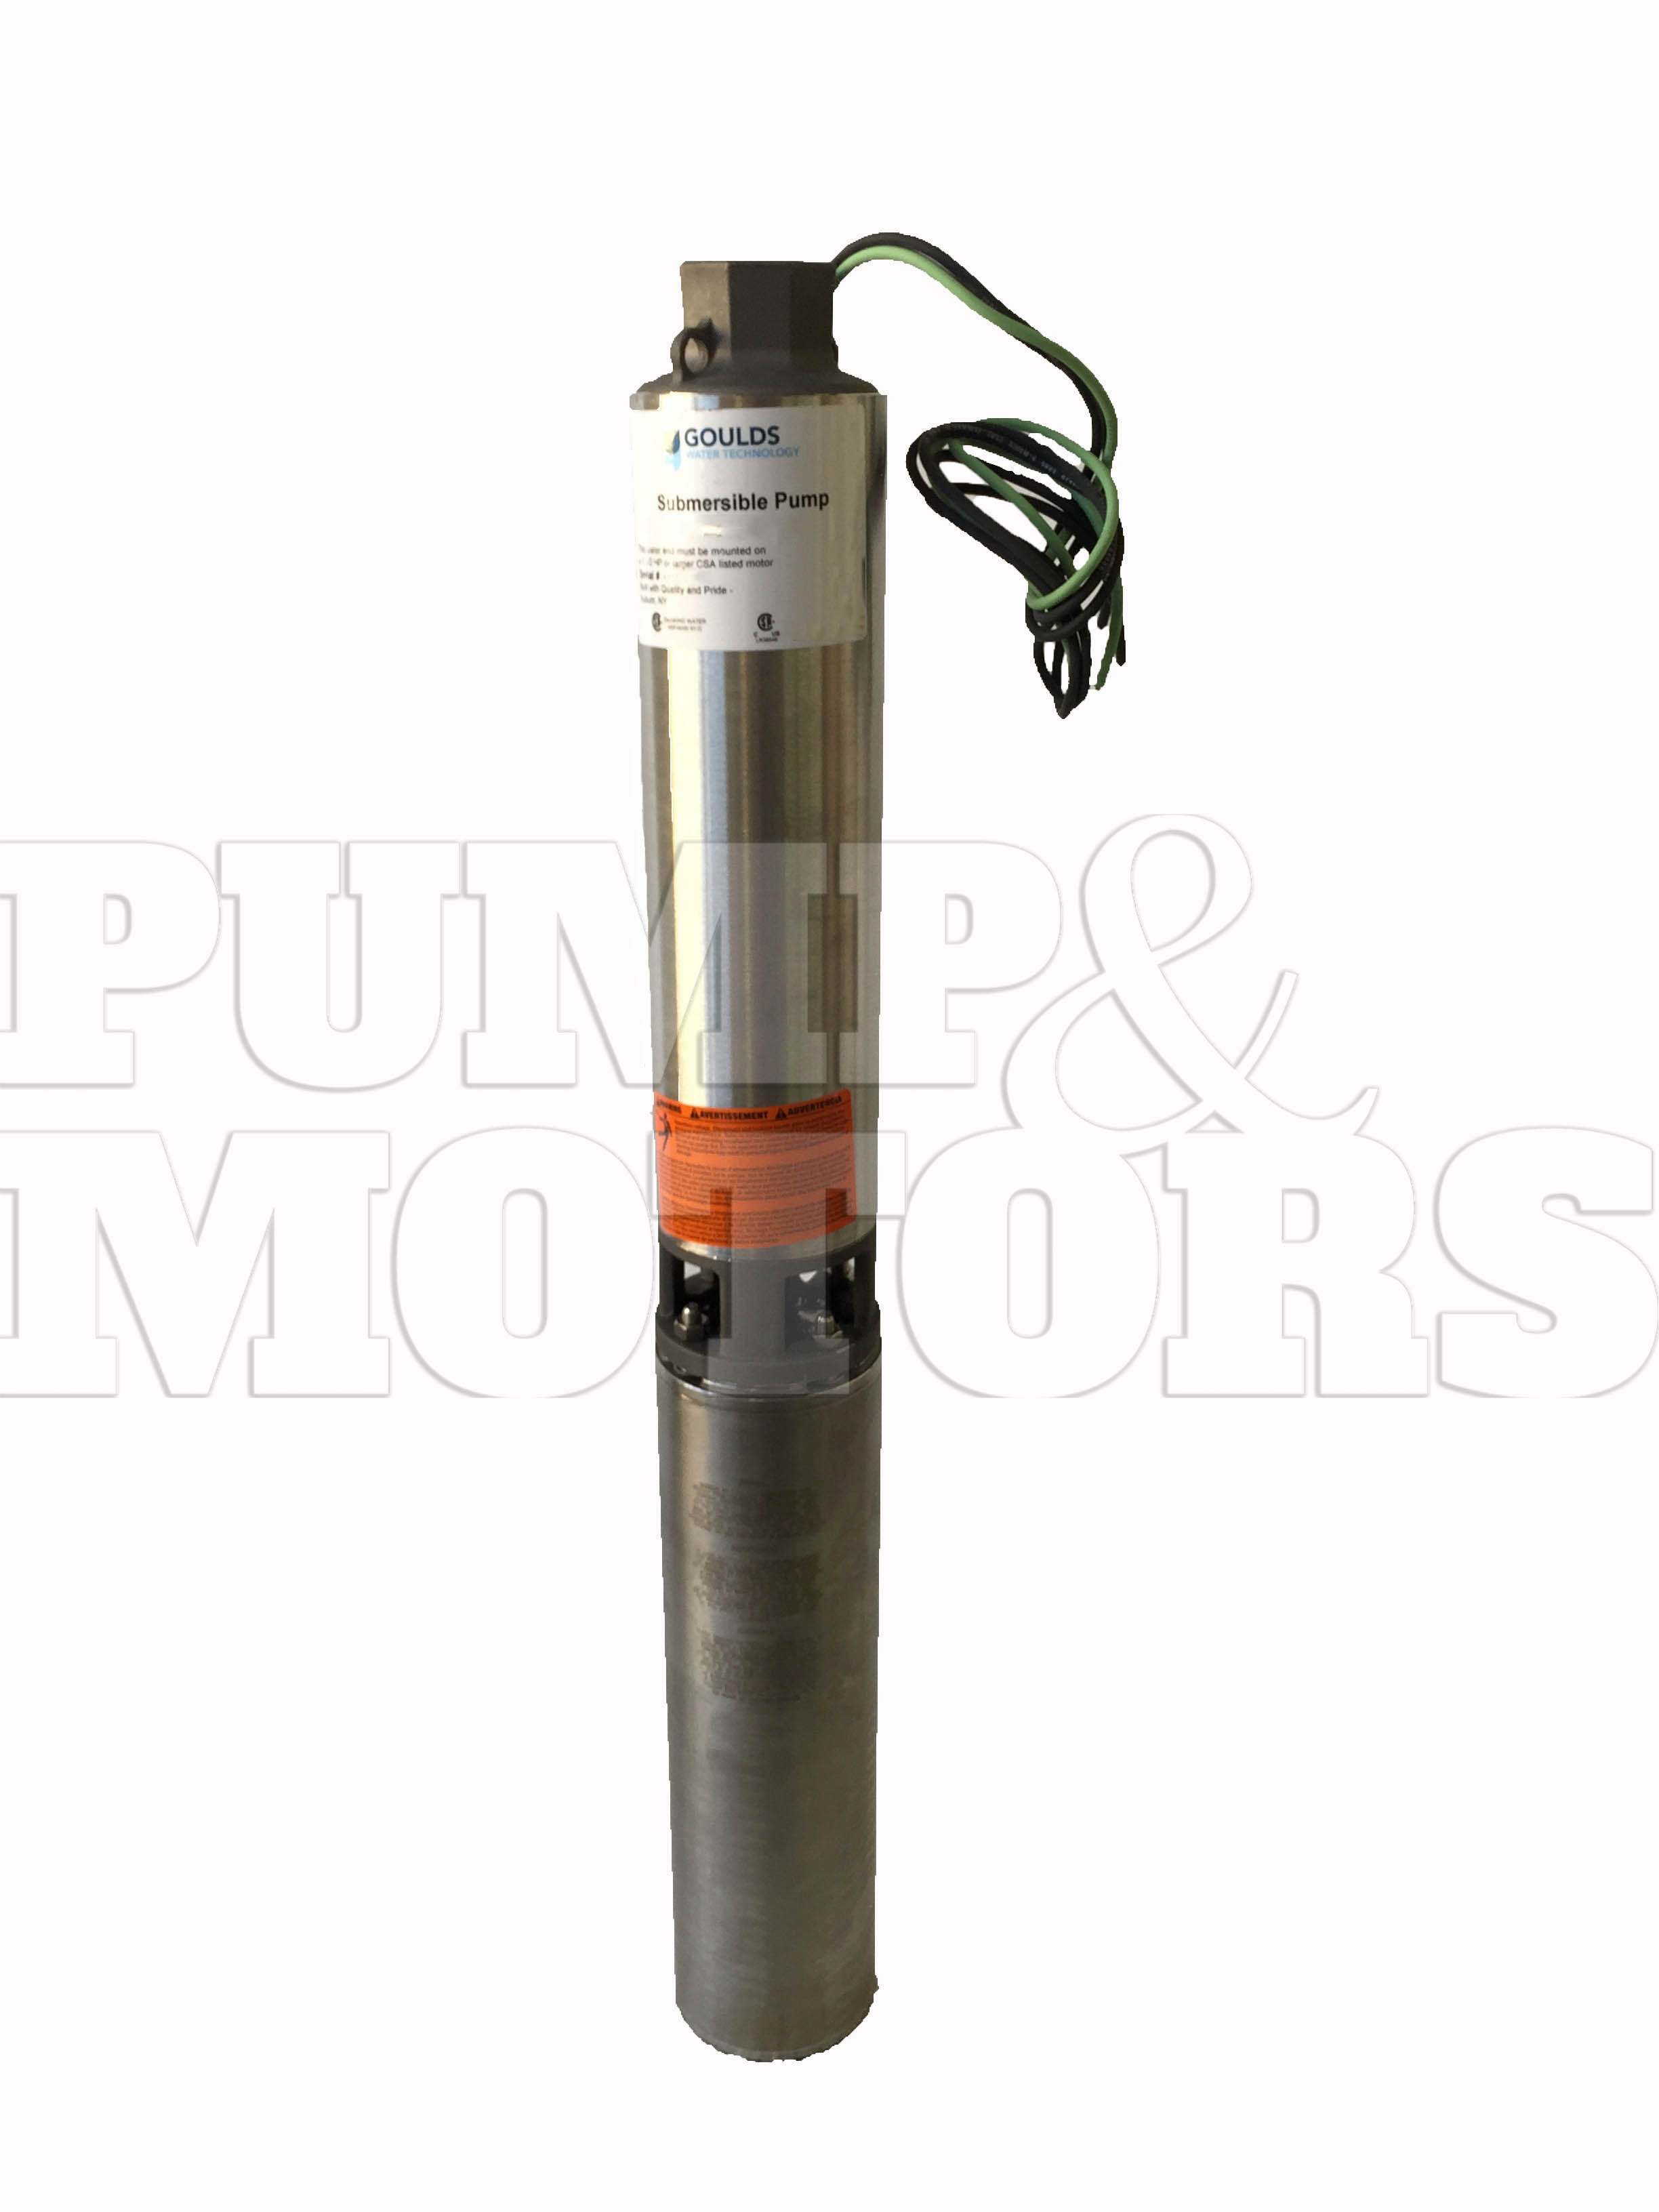 45GS15422C Goulds 45GPM Submersible Water Well Pump 1.5HP